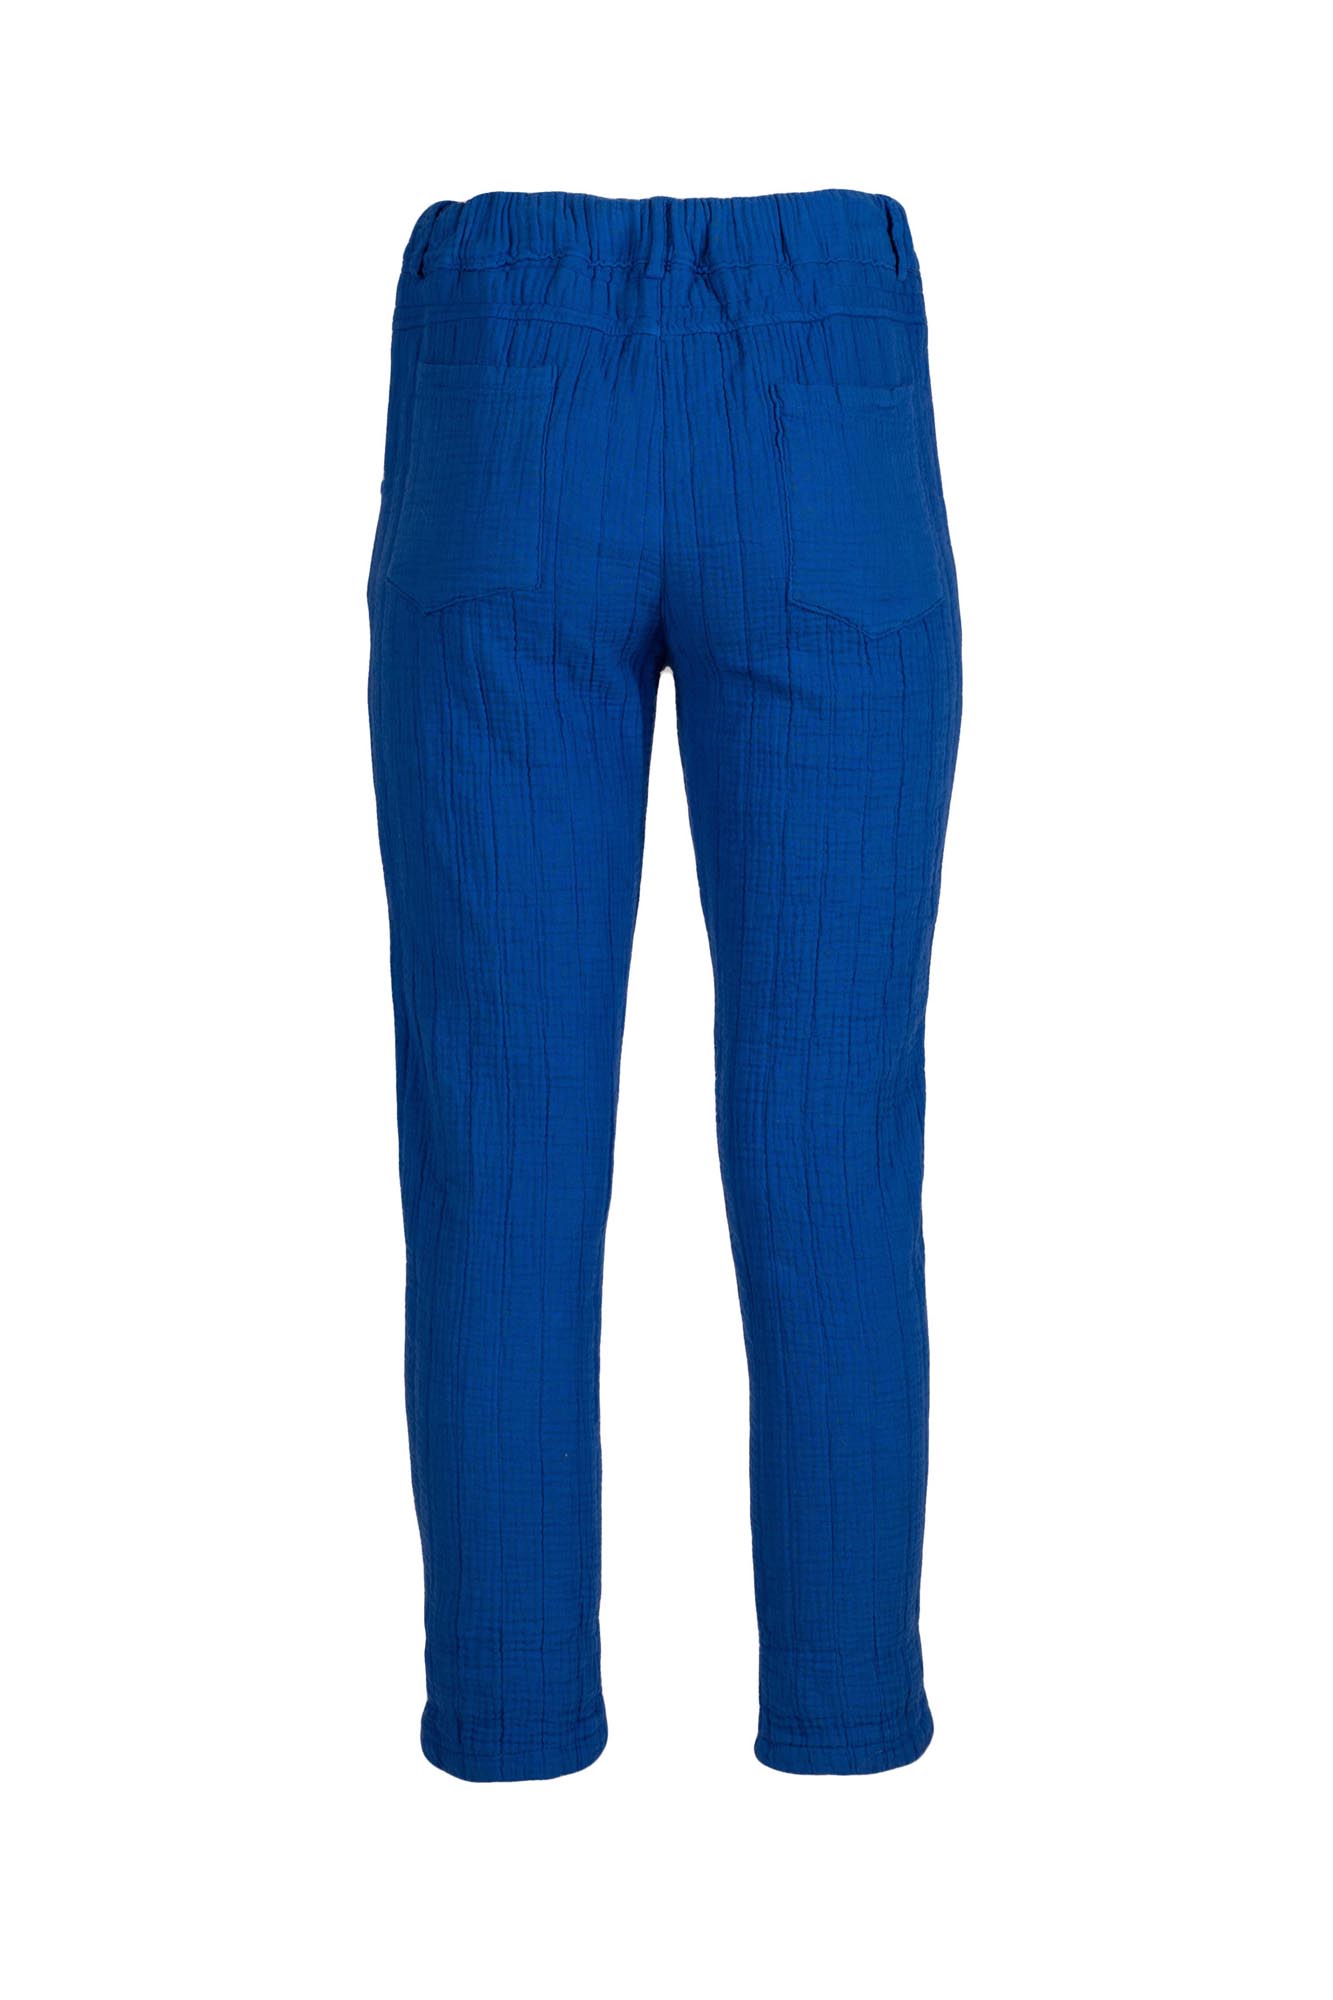 Soft Crumpled 7/8 Trousers with Elasticated Backband